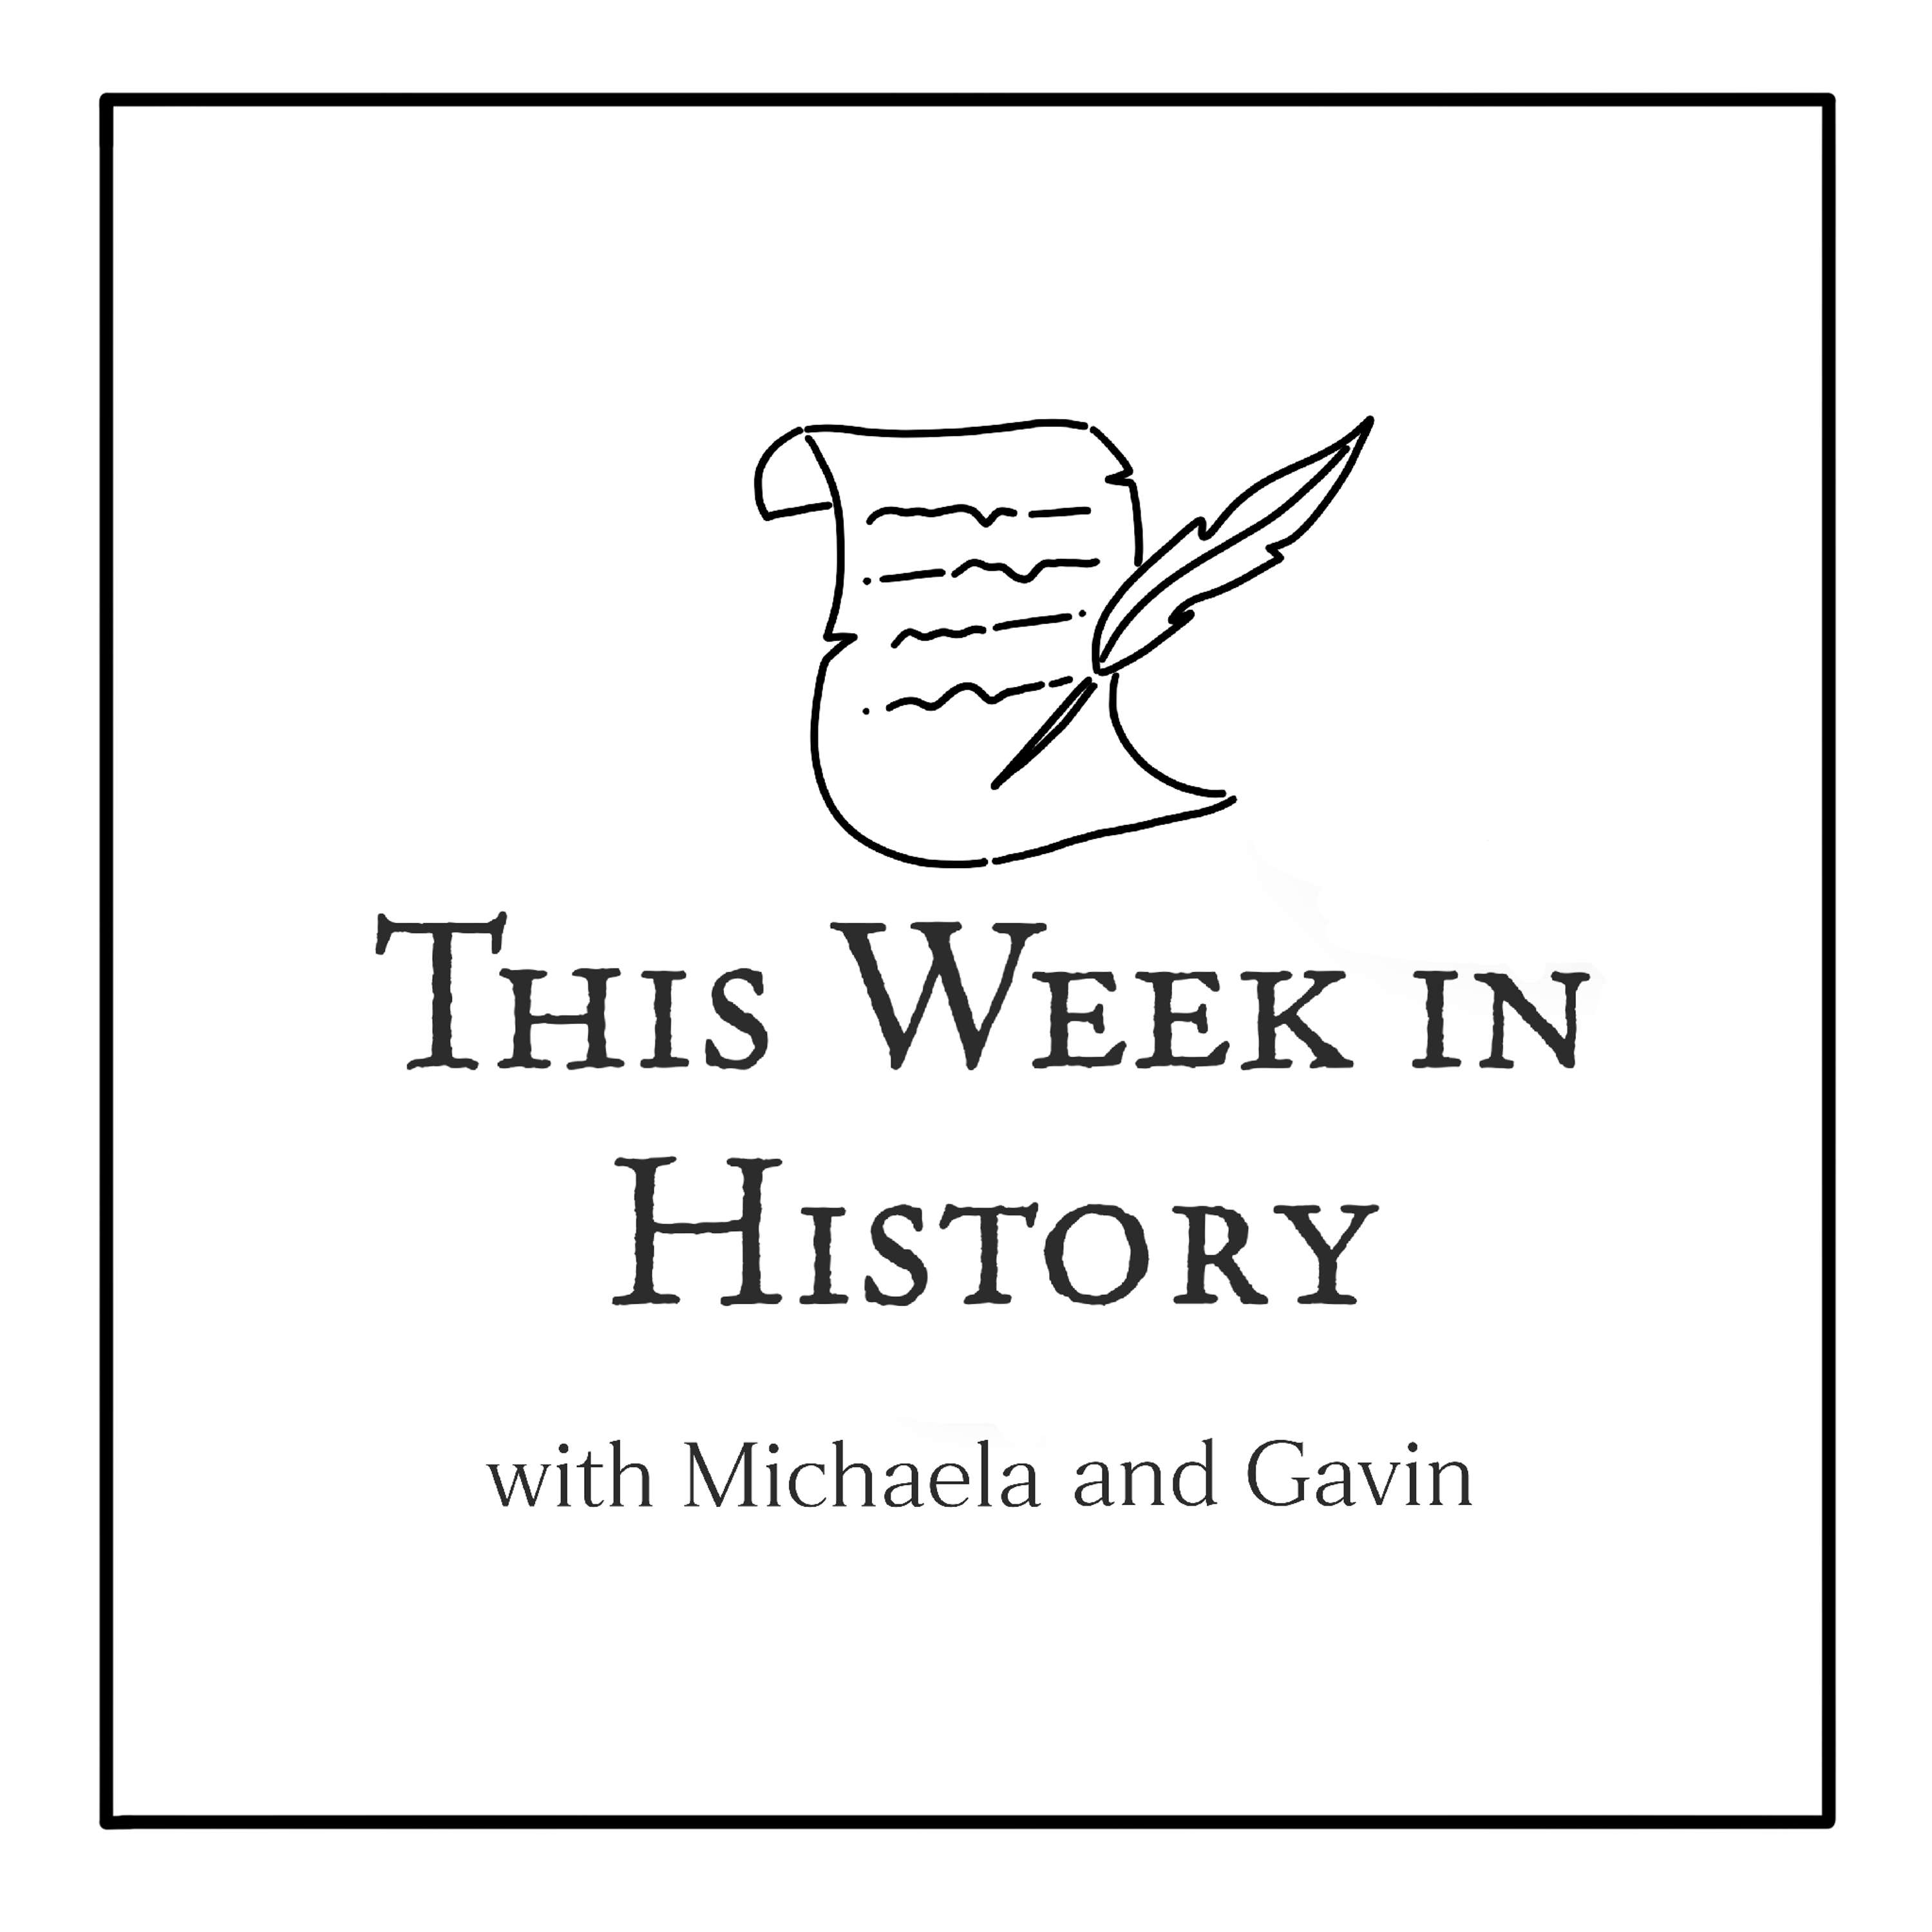 This Week In History with Michaela and Gavin: June 30-July 6